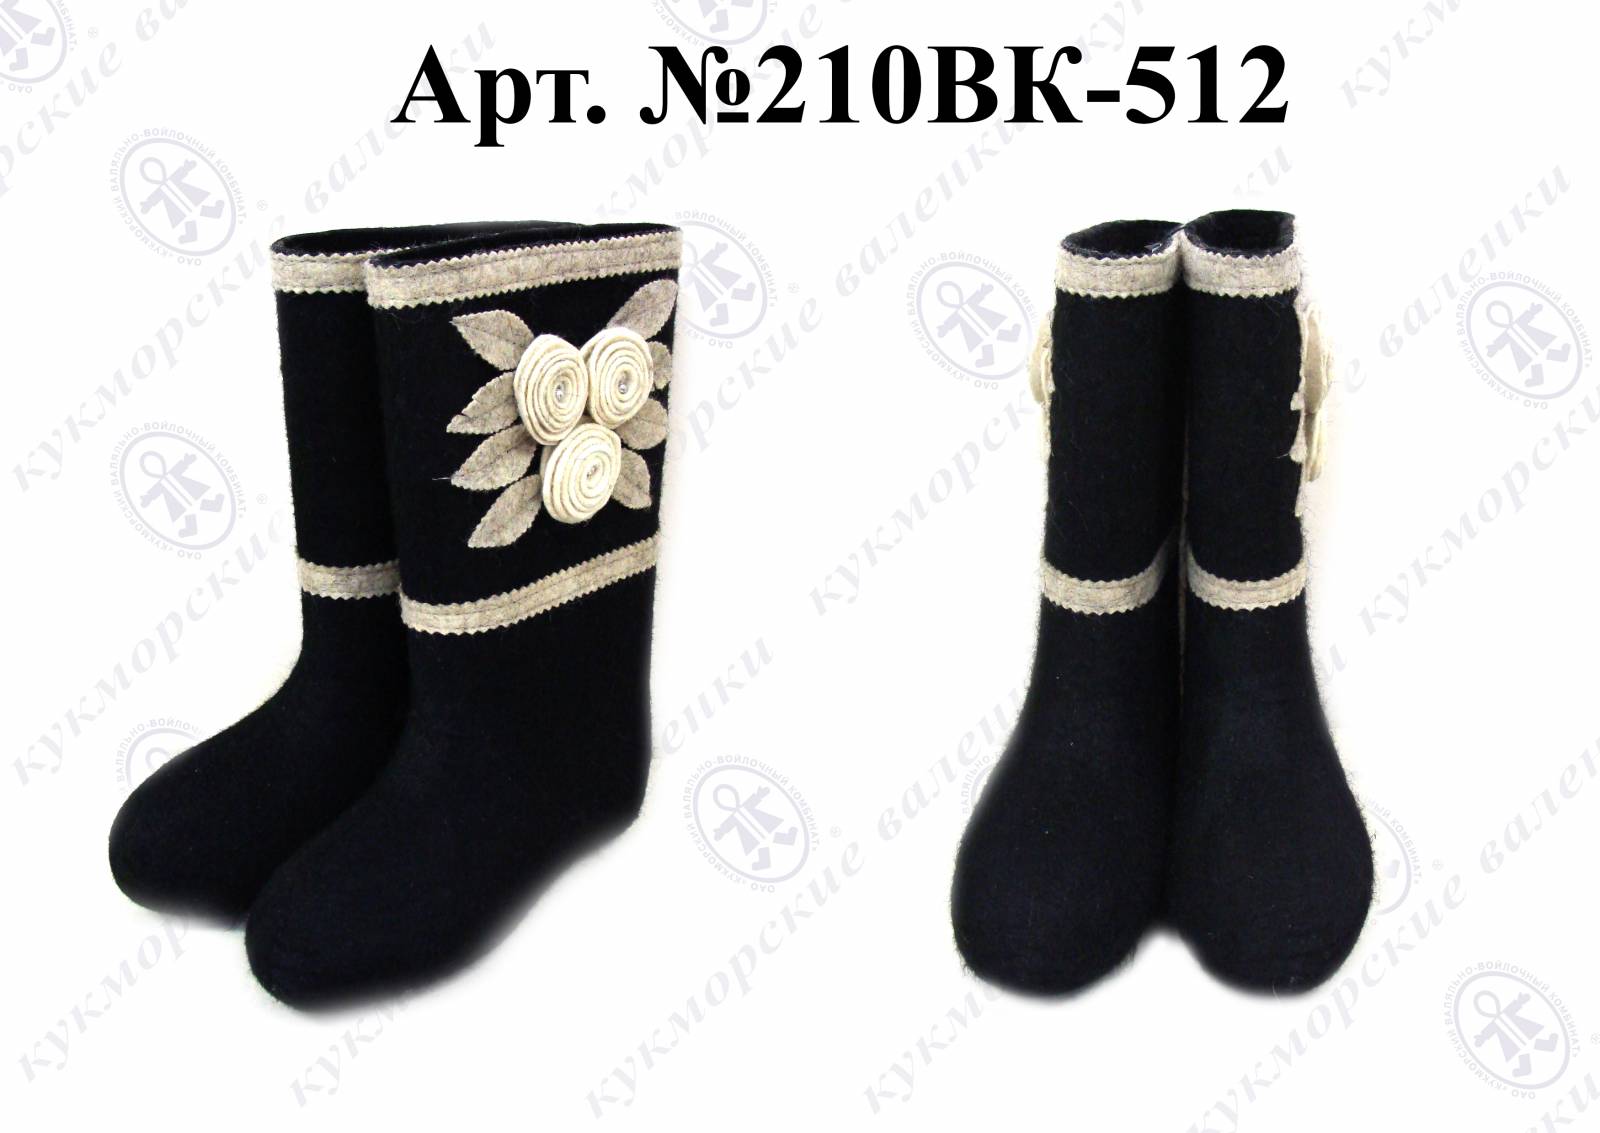 Sheep wool Boots (Valenki) with 